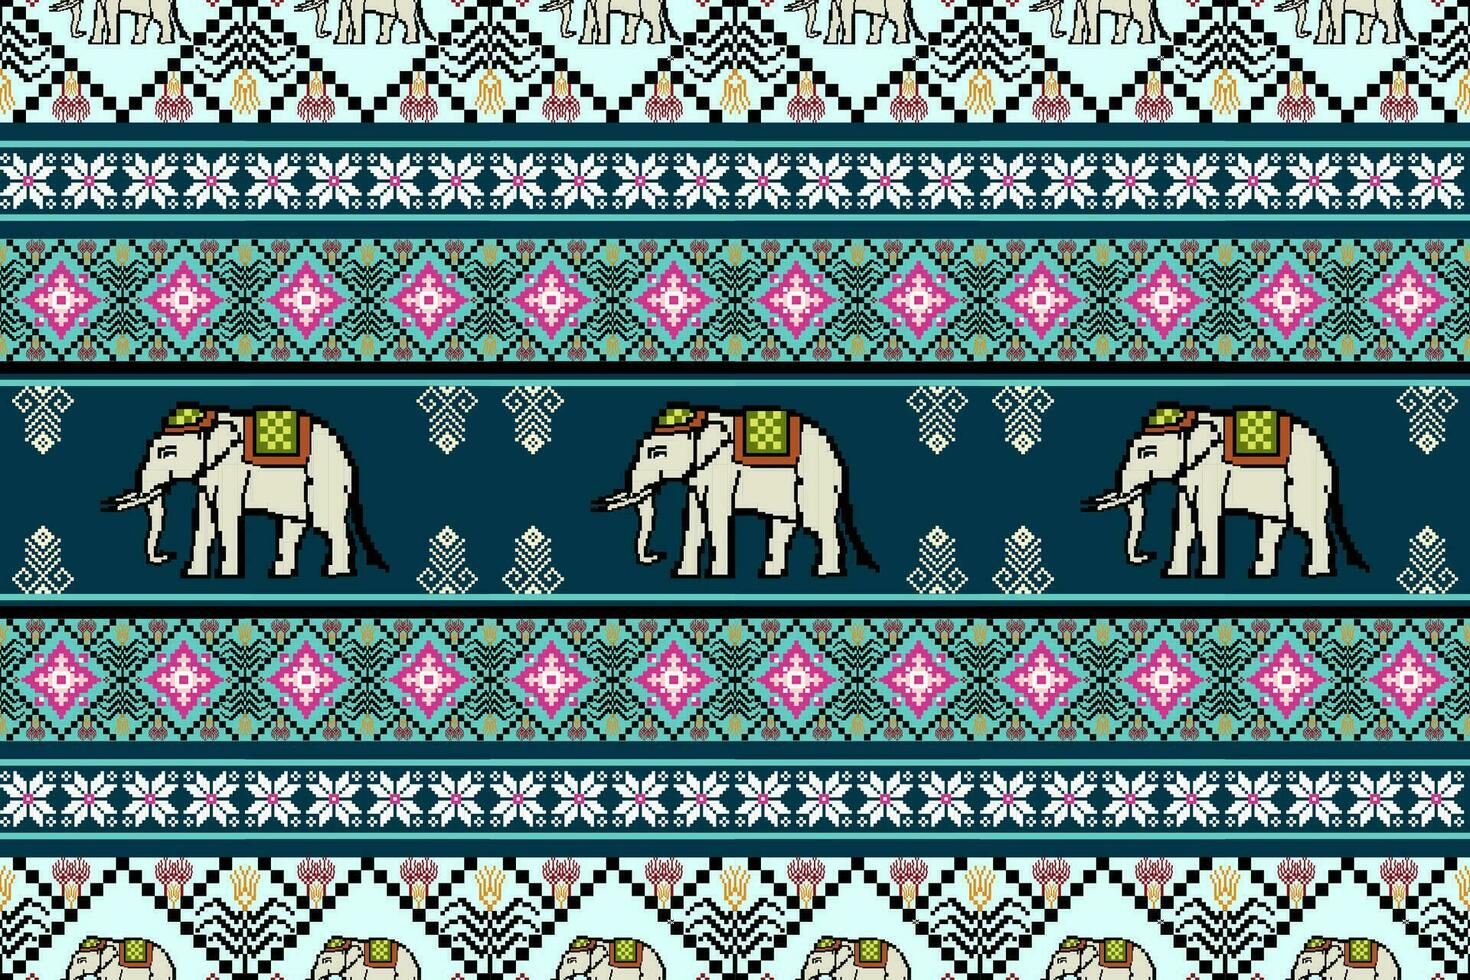 Ethnic Thai Elephant Pixel Art Seamless Pattern.  Vector design for fabric, tile, embroidery, wallpaper and background